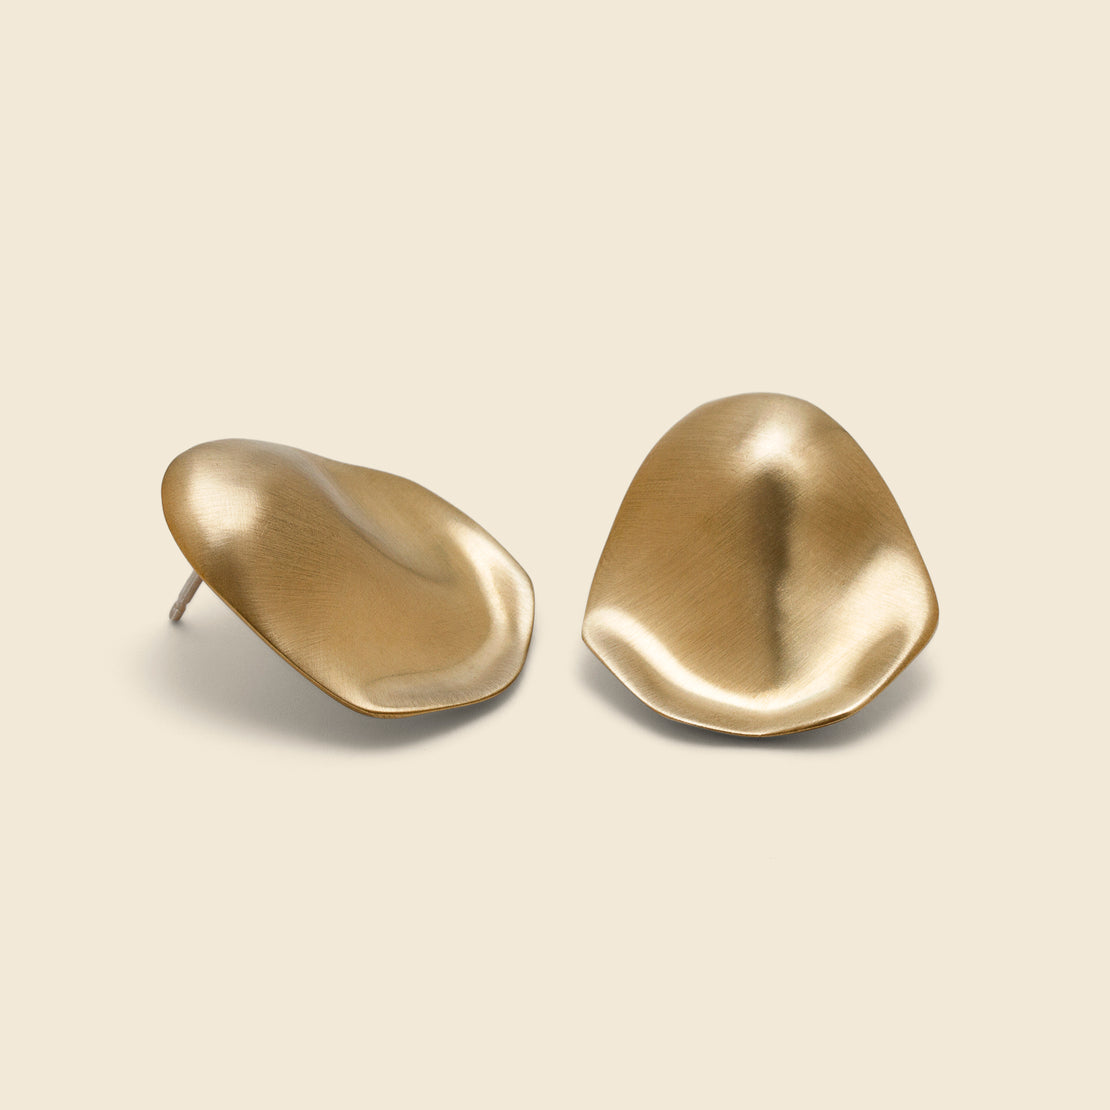 Smooth Oval Large Stud Earrings - Brass - 8.6.4 Design - STAG Provisions - W - Accessories - Earrings